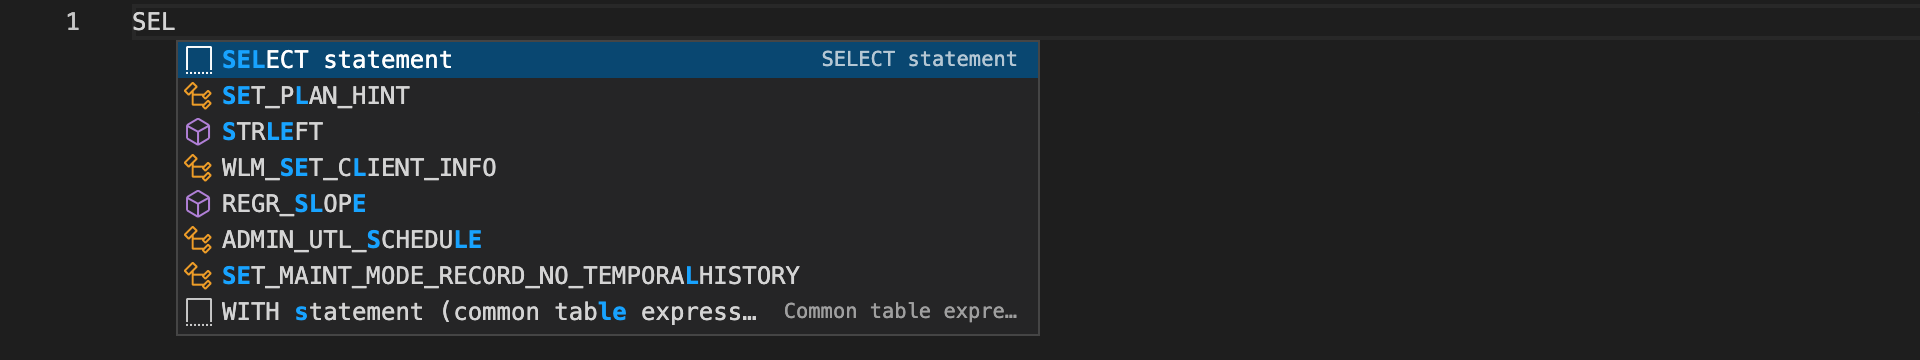 SELECT statement code snippet